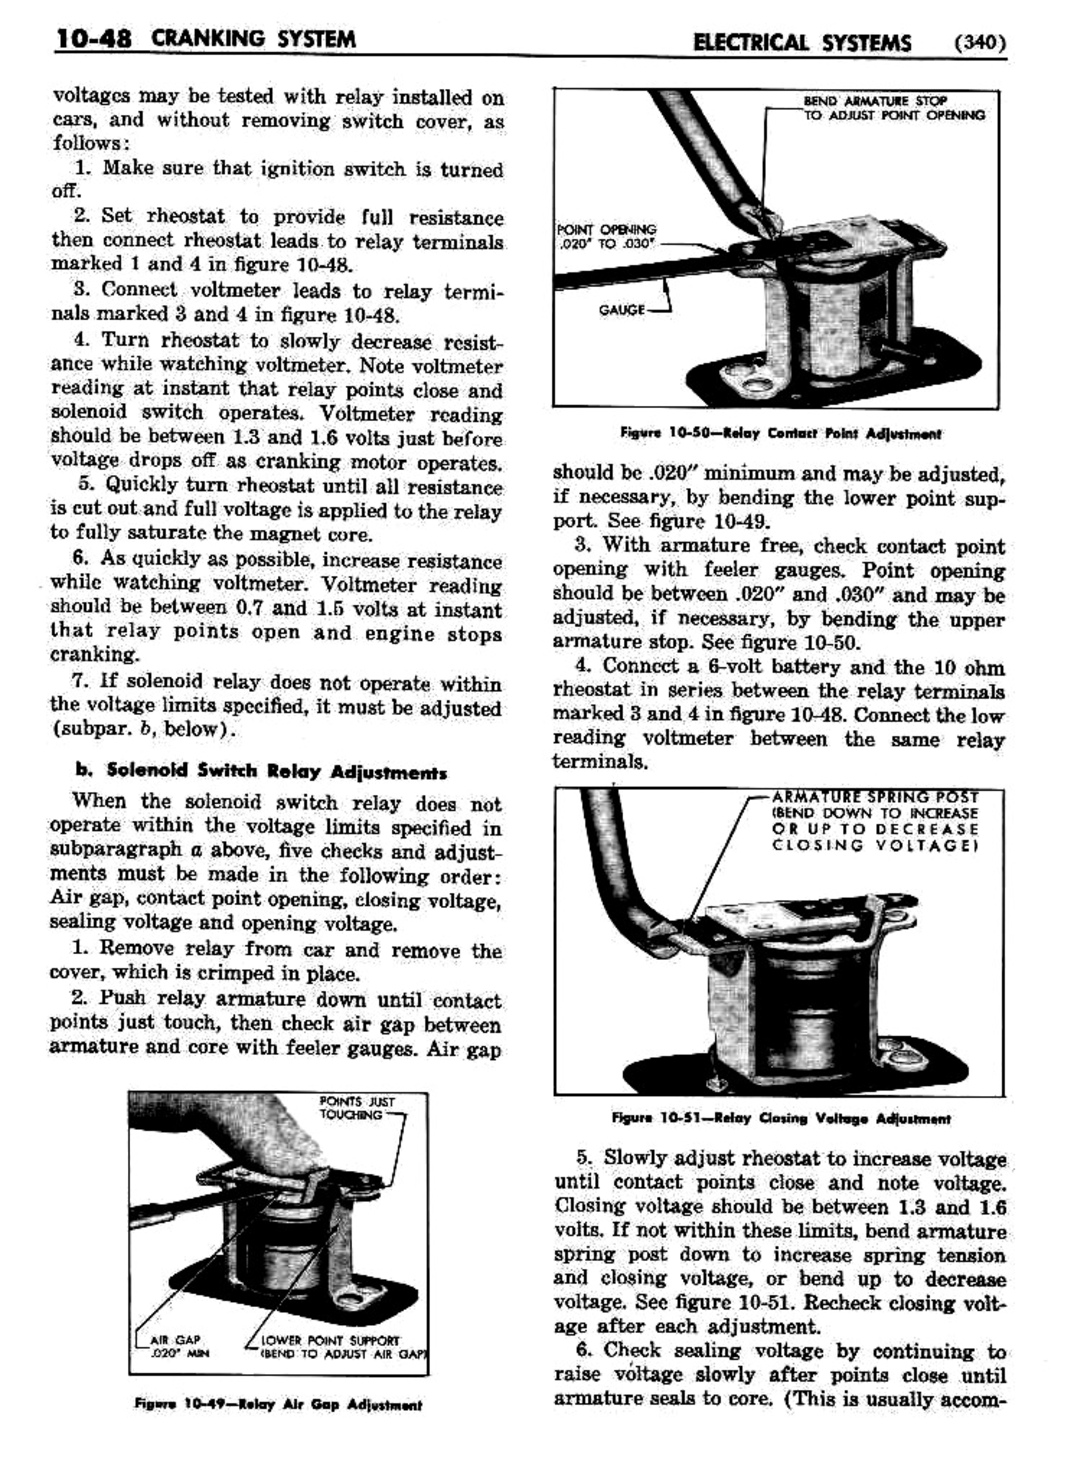 n_11 1951 Buick Shop Manual - Electrical Systems-048-048.jpg